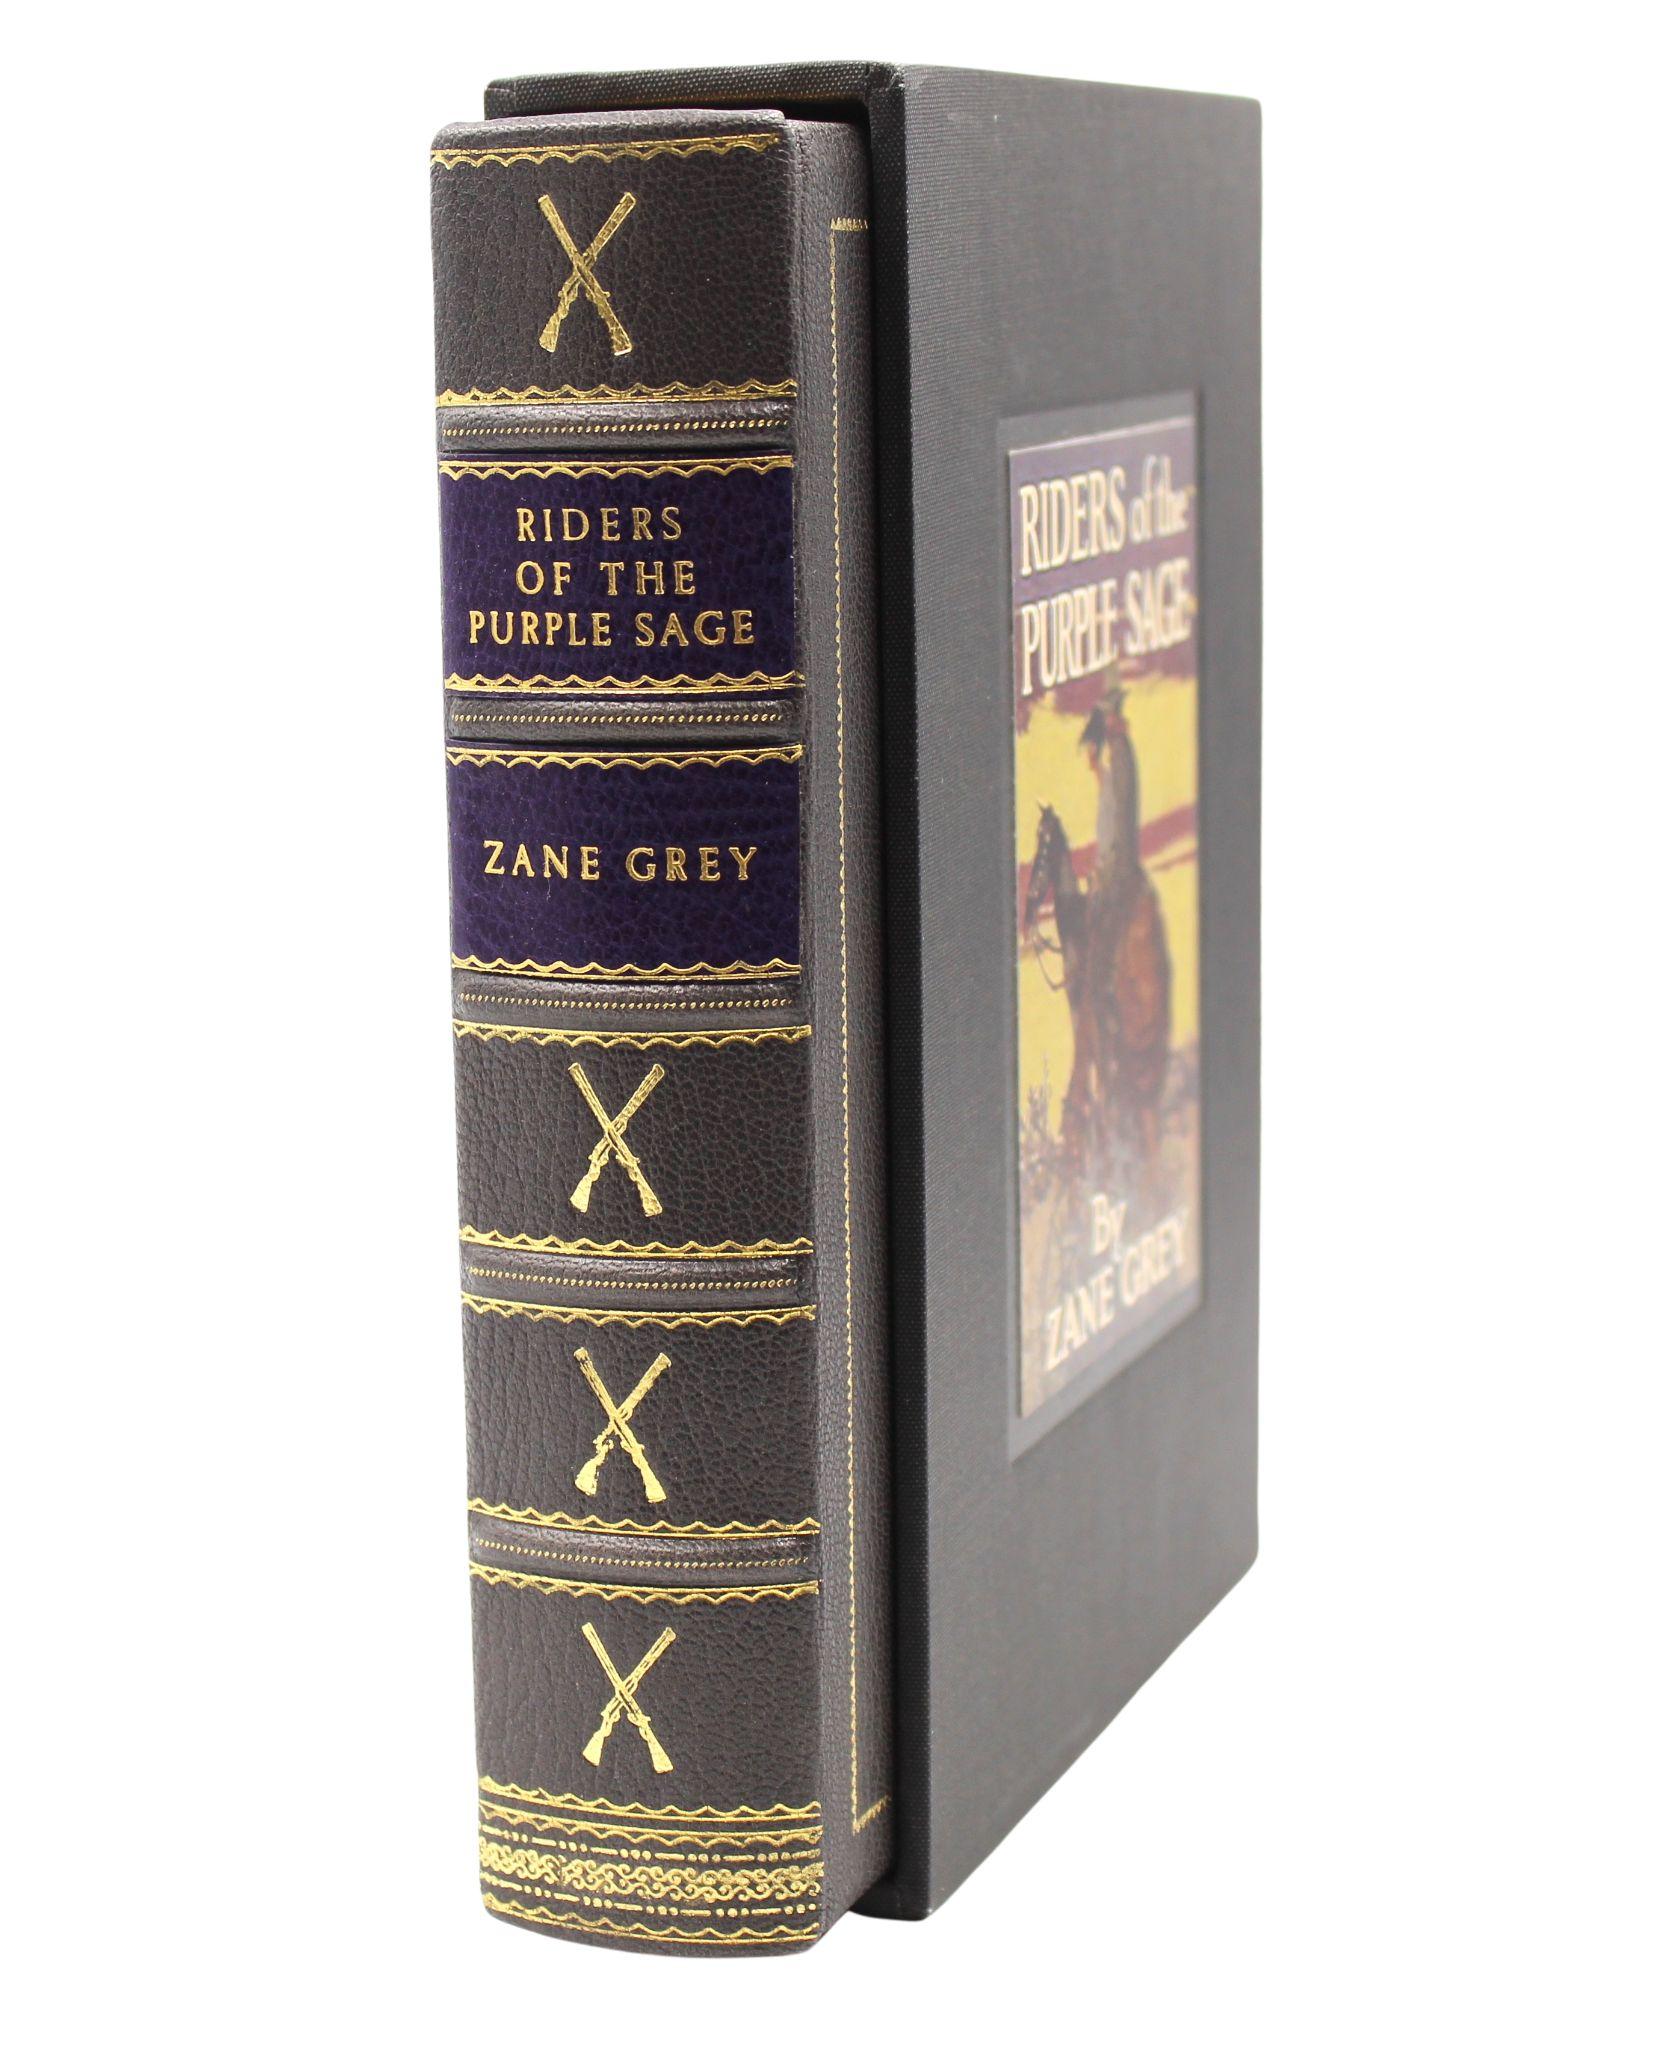 Grey, Zane. Riders of the Purple Sage. A Novel. New York: Grosset & Dunlap, 1912 (1940s). Illustrated by Douglas Duer. Presented in full gray Moroccan leather with gilt tooling to front board, raised bands, gilt titles, and gilt tooling to spine,